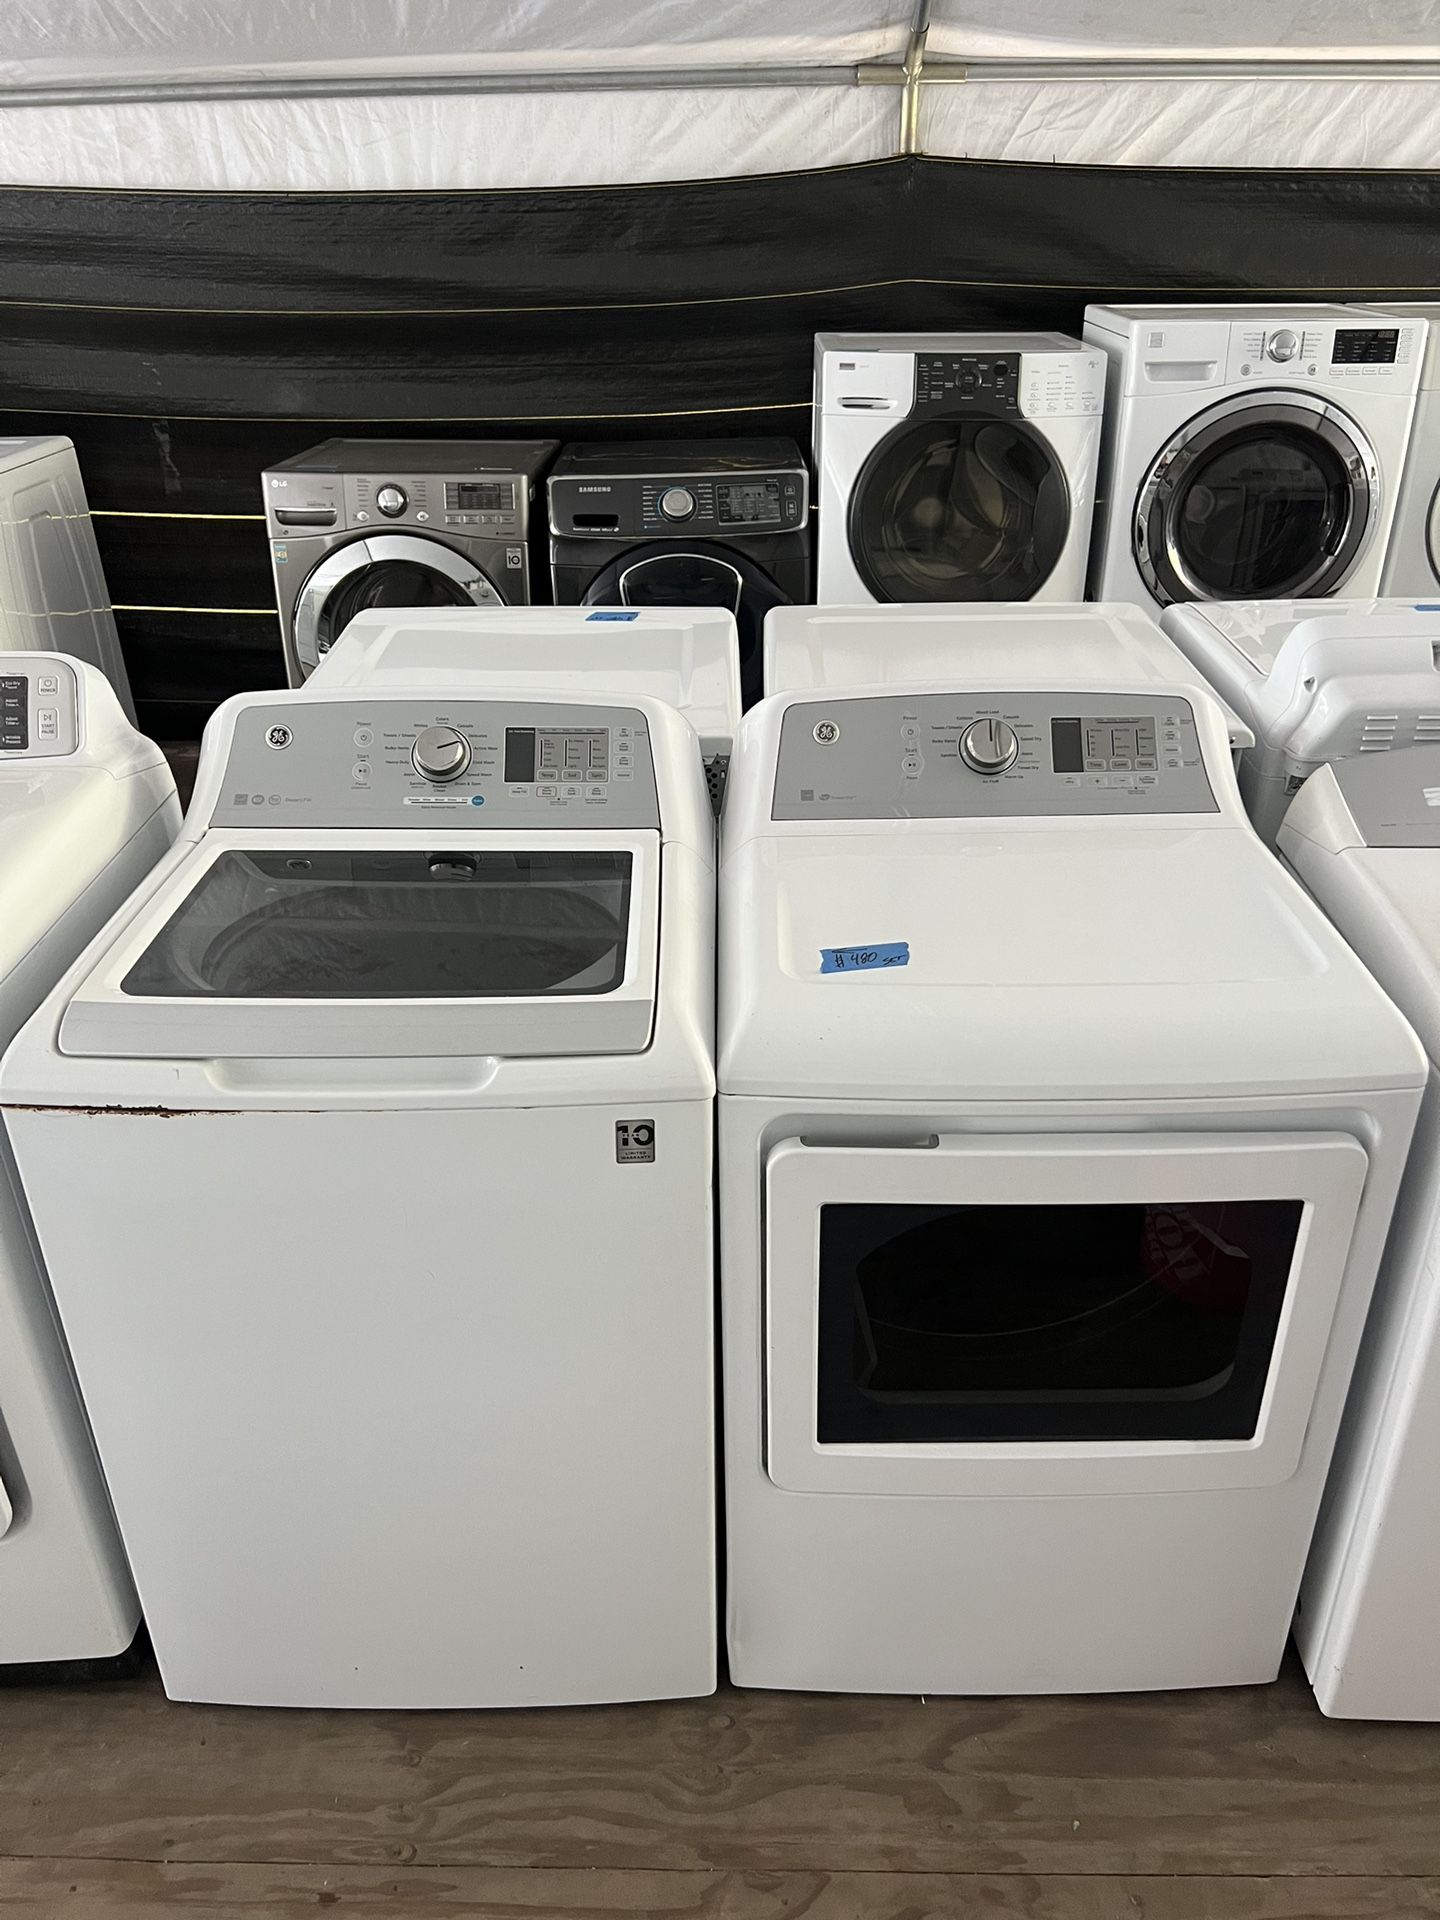 Ge Washer&dryer Set Large Capacity Set   60 day warranty/ Located at:📍5415 Carmack Rd Tampa Fl 33610📍